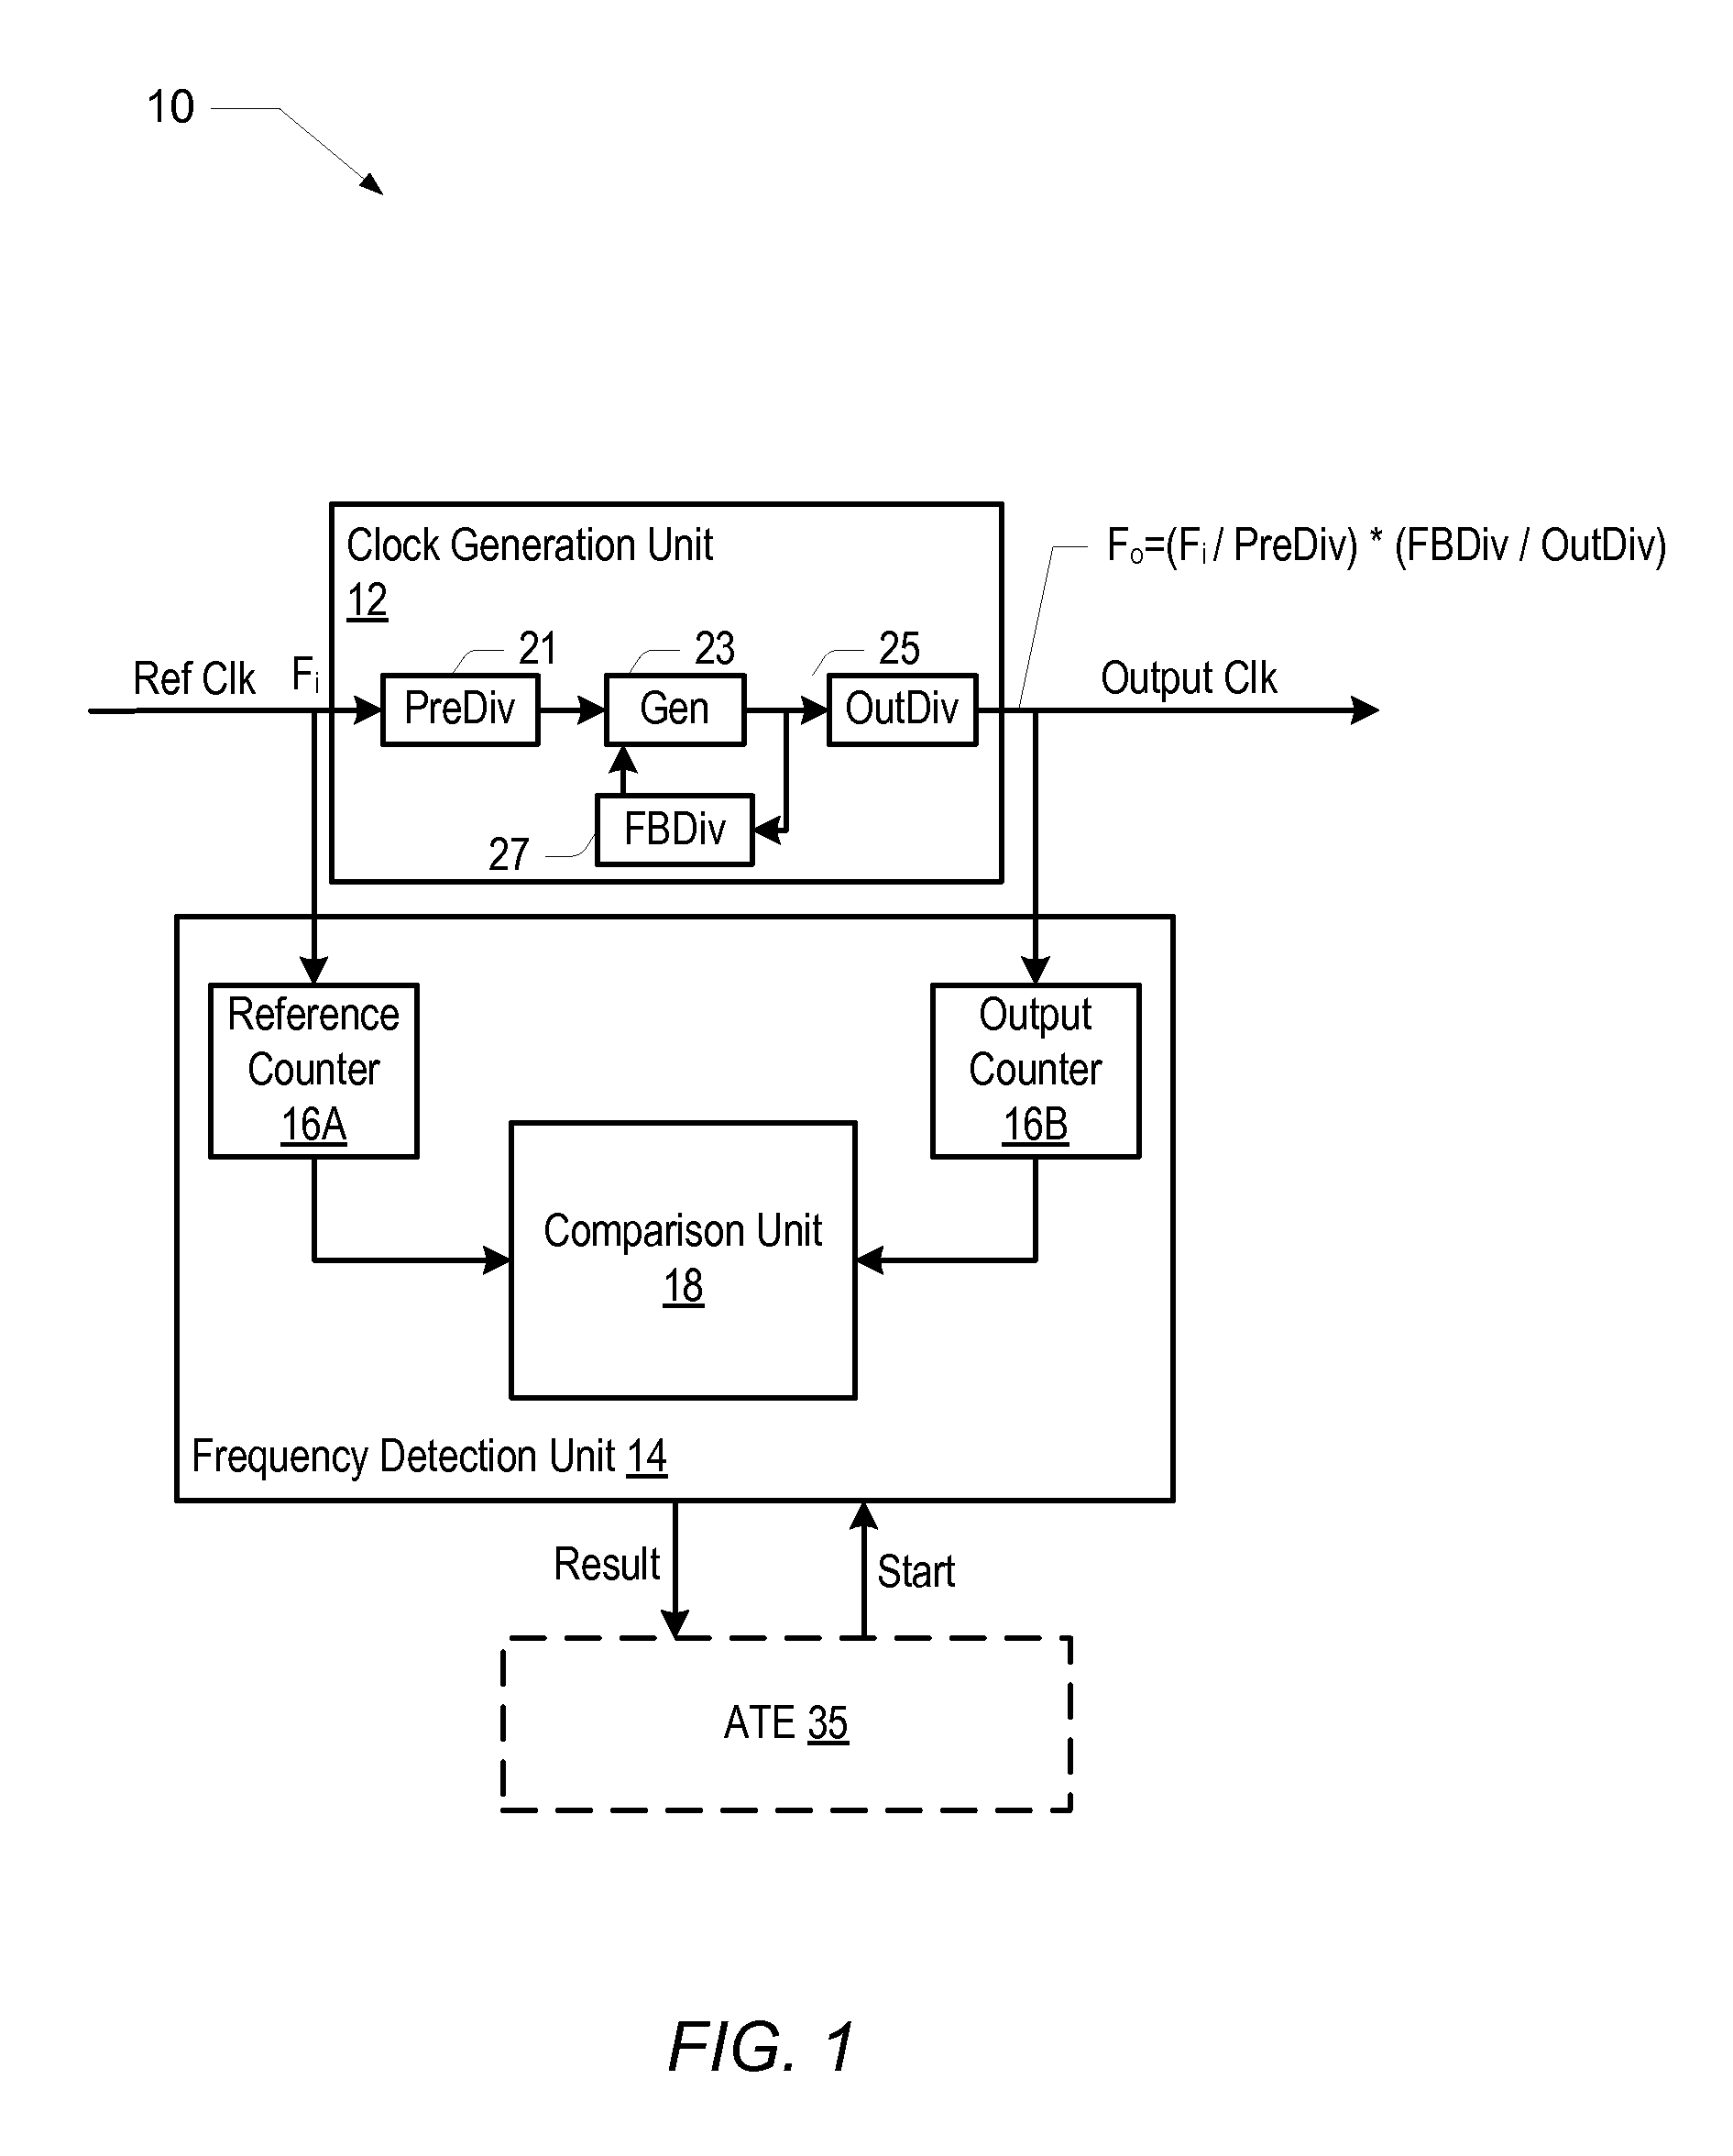 Frequency detection mechanism for a clock generation circuit